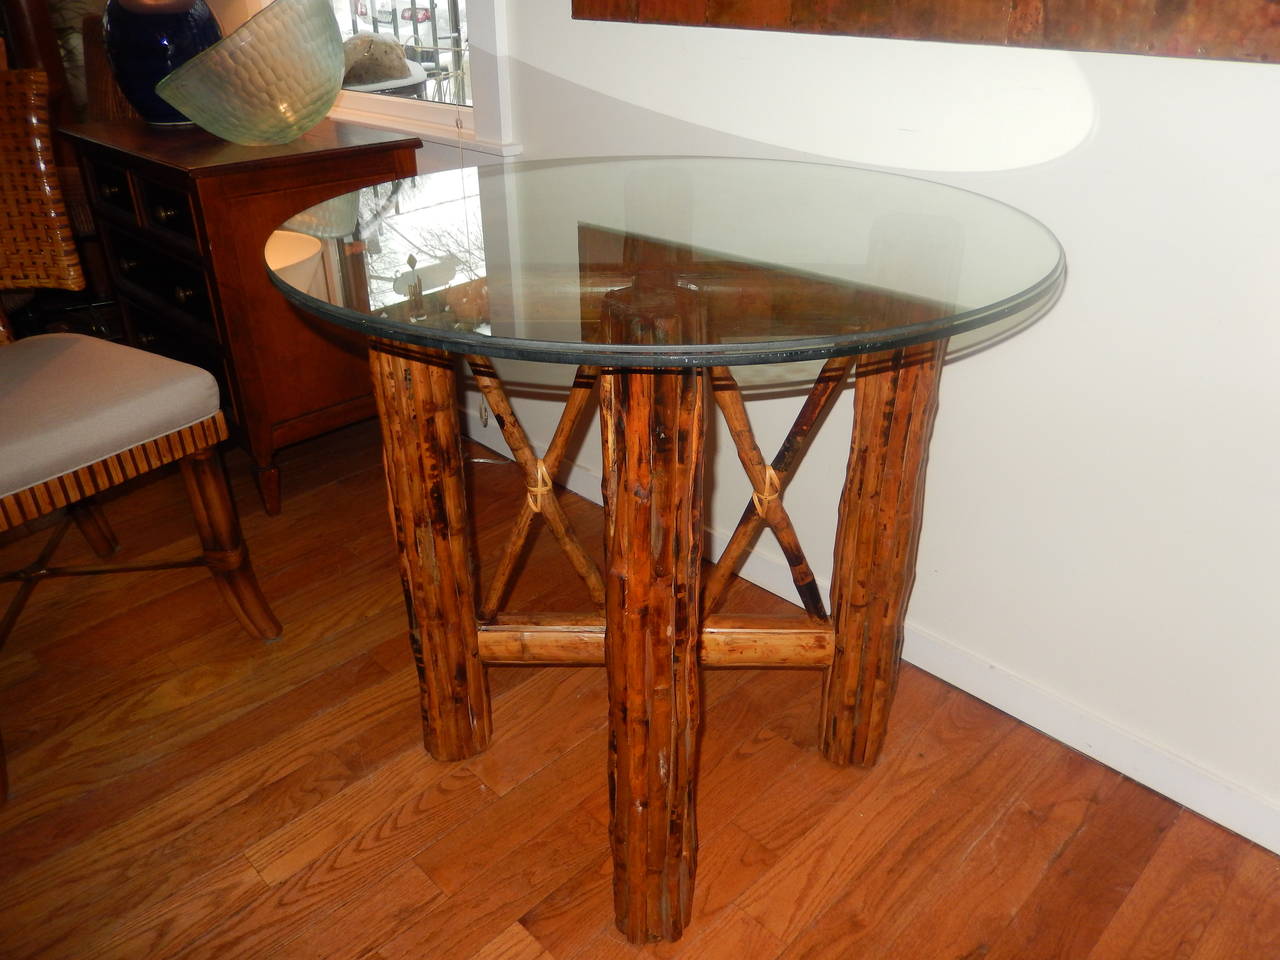 English Bamboo and tortoise shell finish center/dinning table seats four comfortably. With a 40 inch beveled glass top.